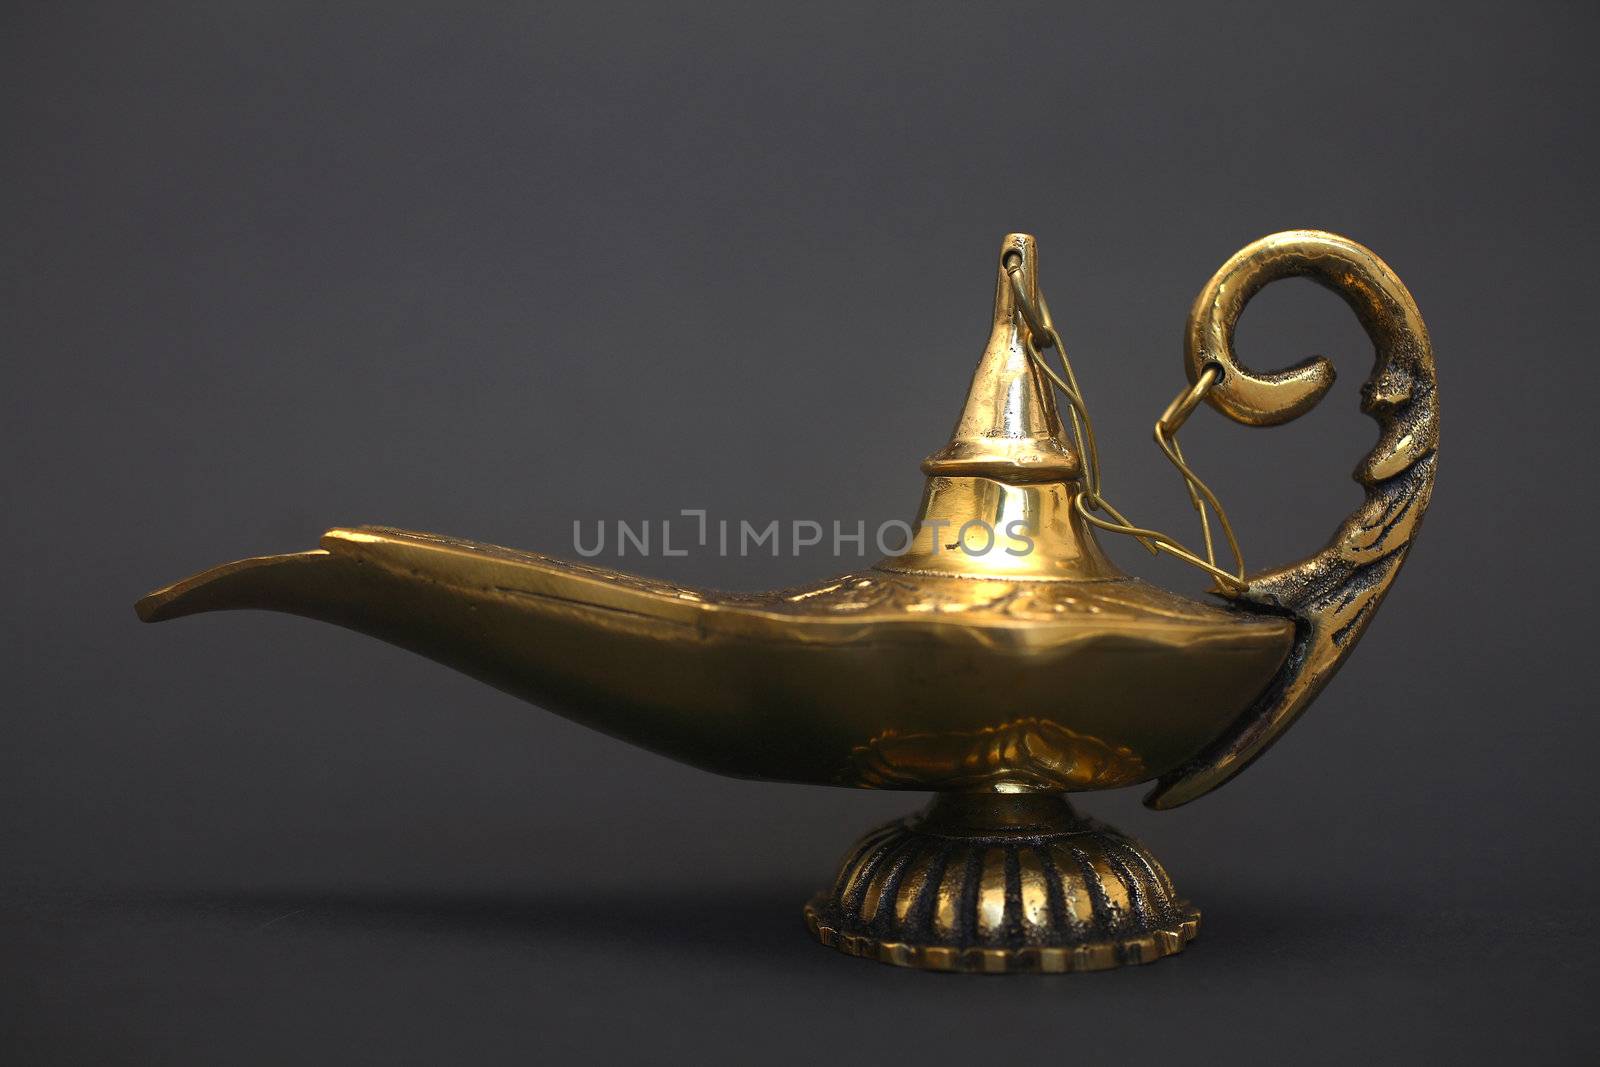 An isolated golden or bronze magic genie lamp, like Aladdins! :)